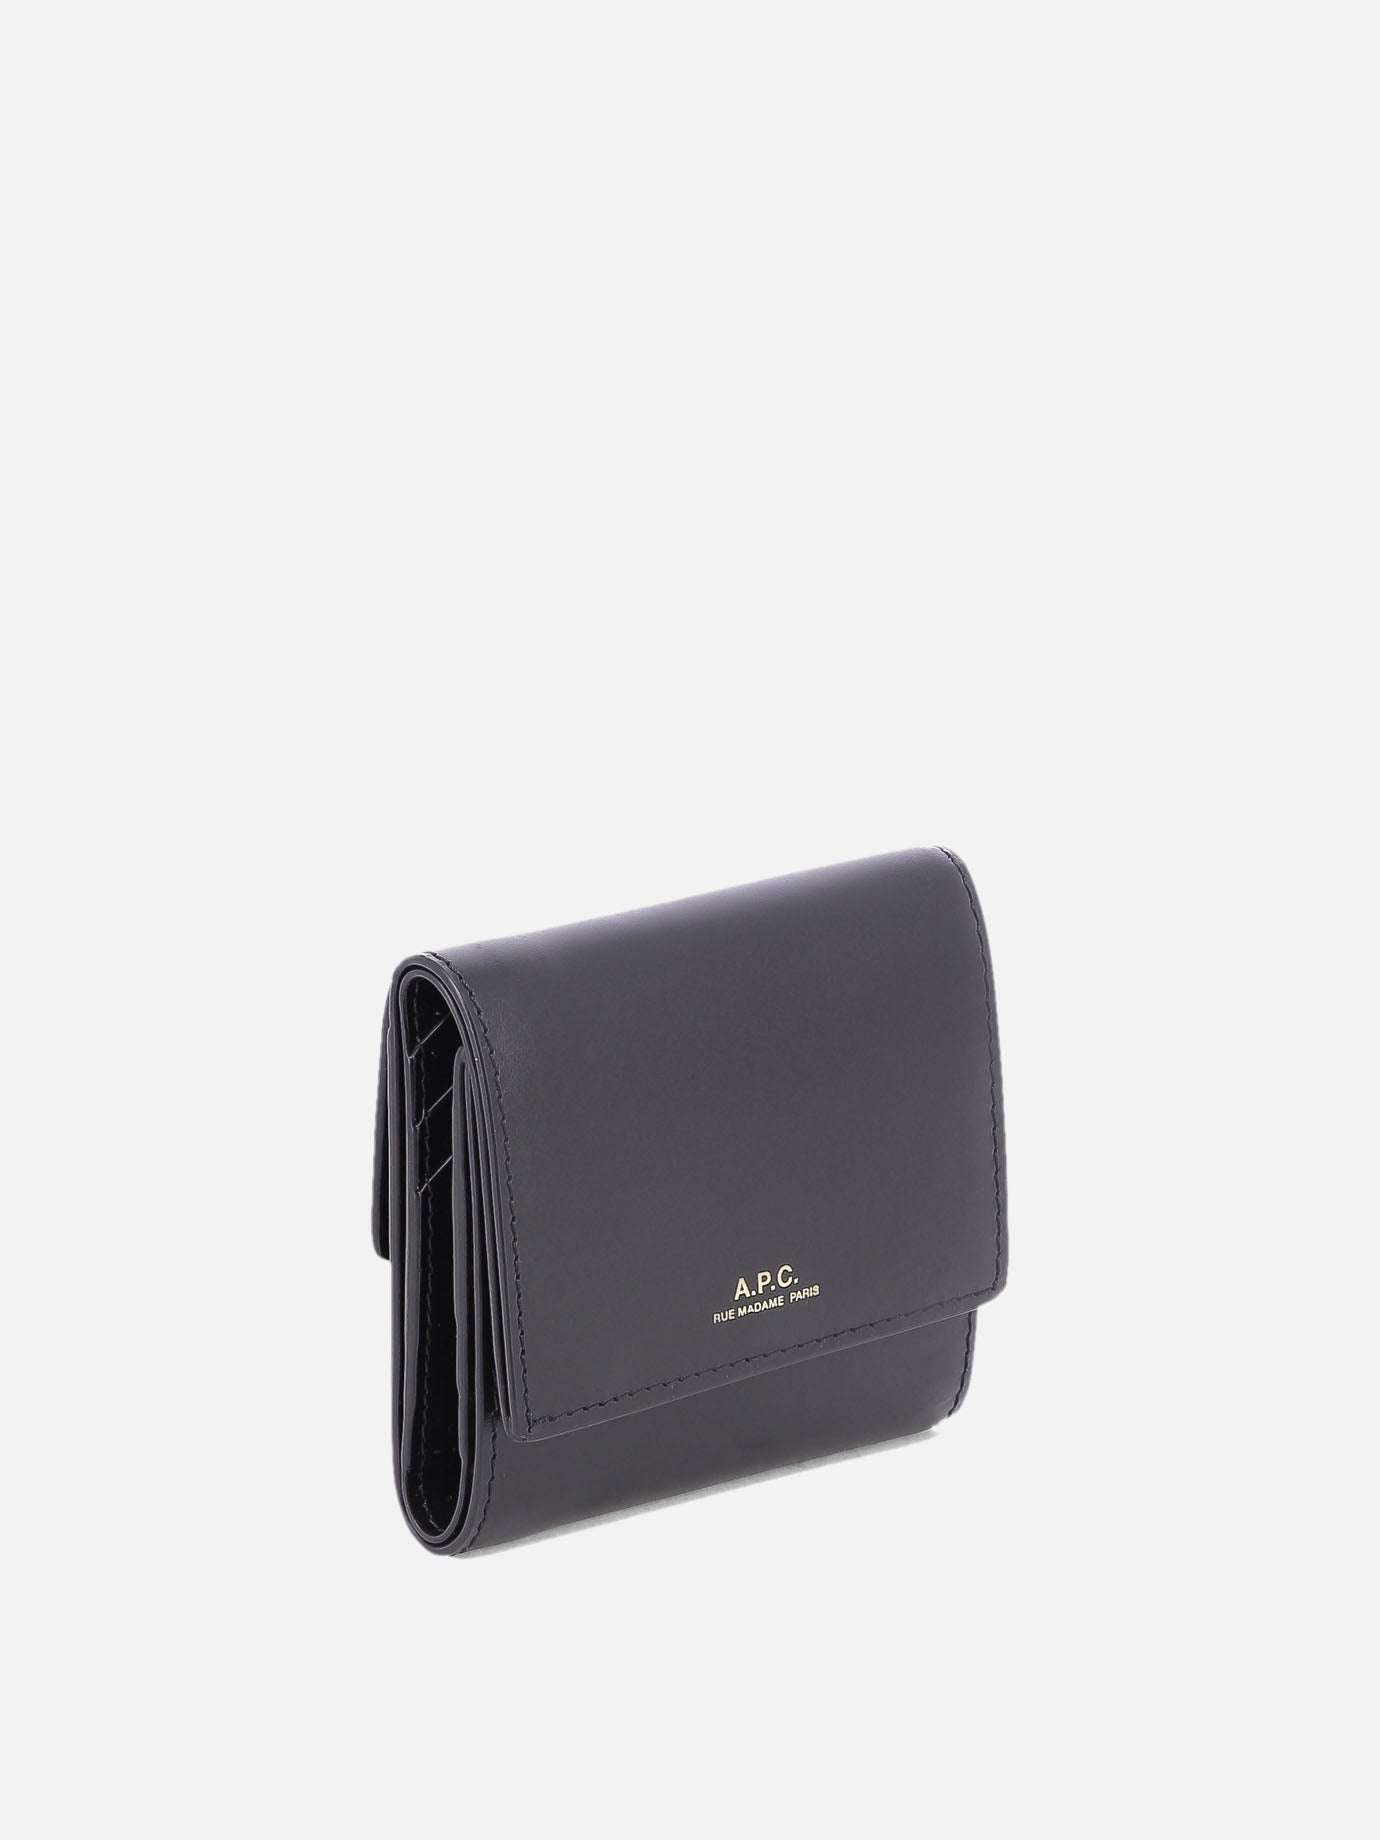 "Lois compact" wallet